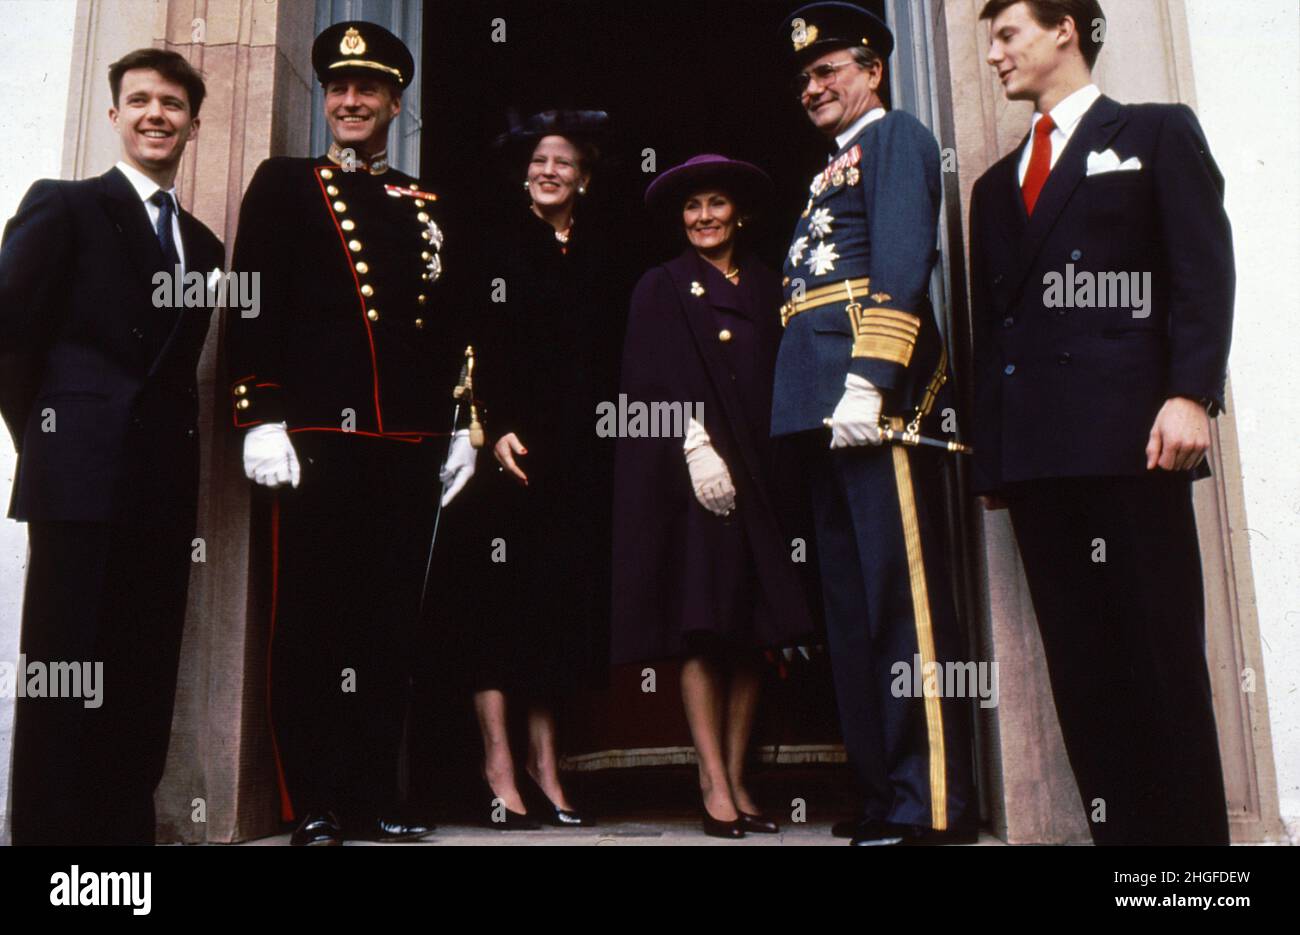 Fredensborg/Denmark./28 October 1991/.(Historical file images ) King Harld of Nroway and Queen Sonja on royal state visit to H.M.The Queen Margrethe II and pårince Henrik of Denmark H.M.The Queen Margrethe II and Prince Henrik and King Harald and Queen Sonja of Norway and Crown prince Frederik and Prince Joachim of Denmark ar Fredensbrog palace at arrival and offical photograph of both royal couple at palacce in qountry Fredensborg city of Denmark.   (Photo..Francis Joseph Dean/Dean Pictures) Stock Photo